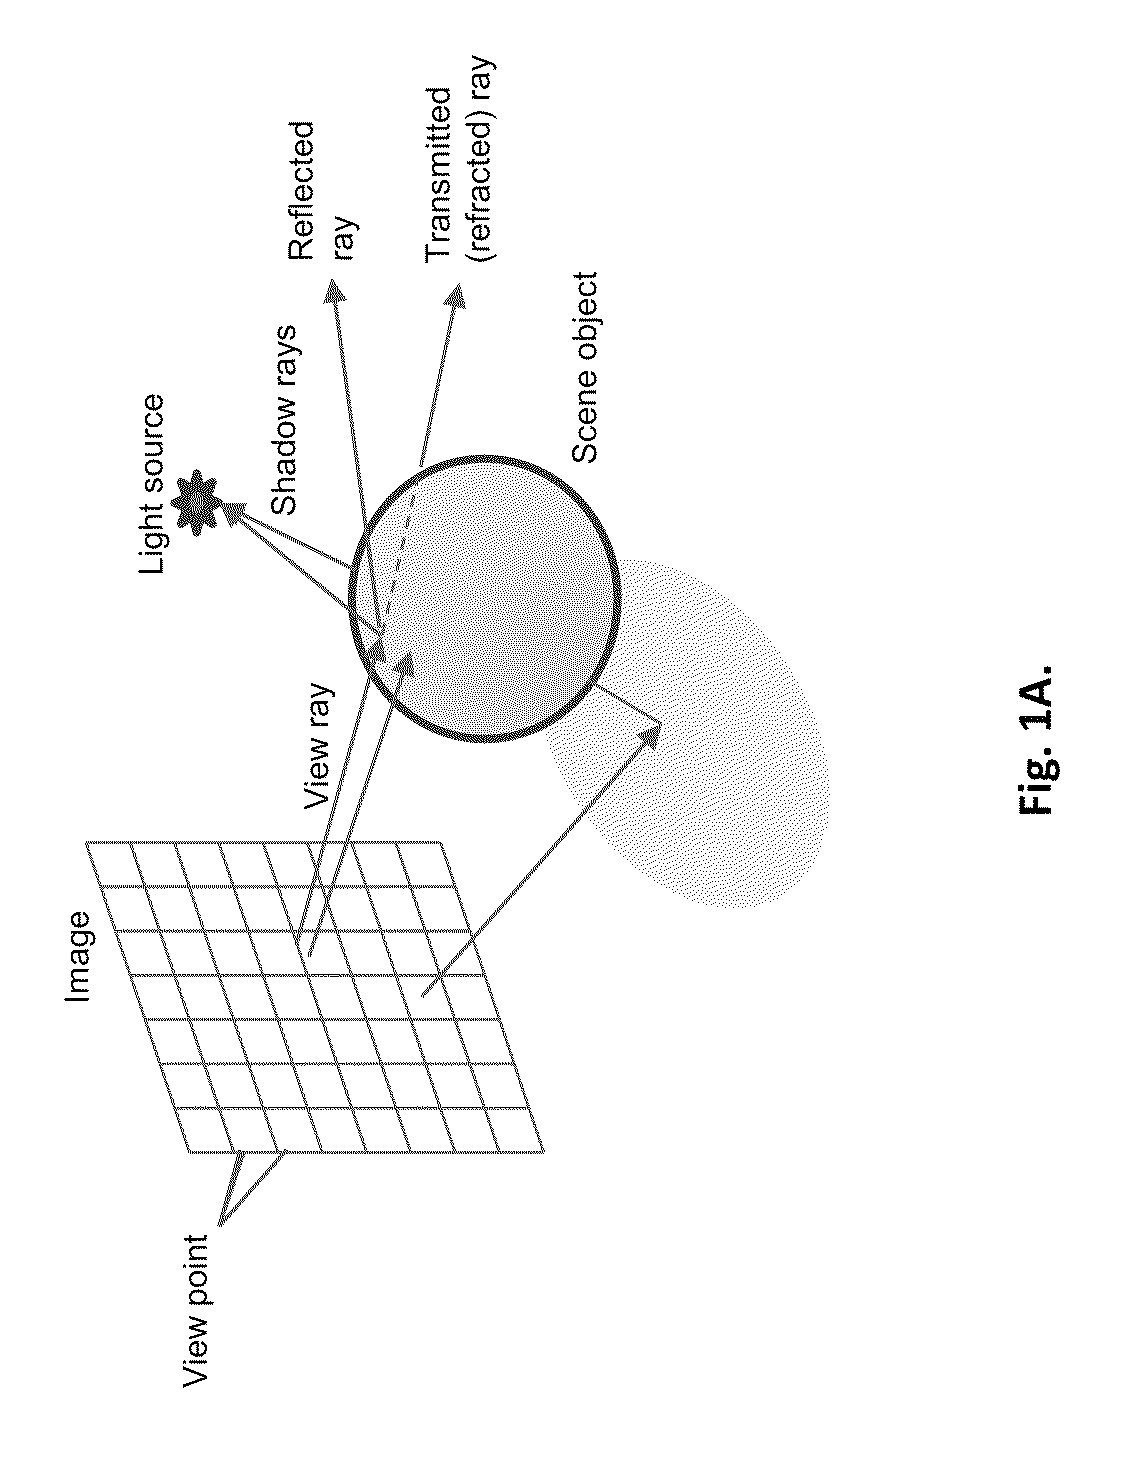 Method and apparatus for parallel ray-tracing employing modular space division